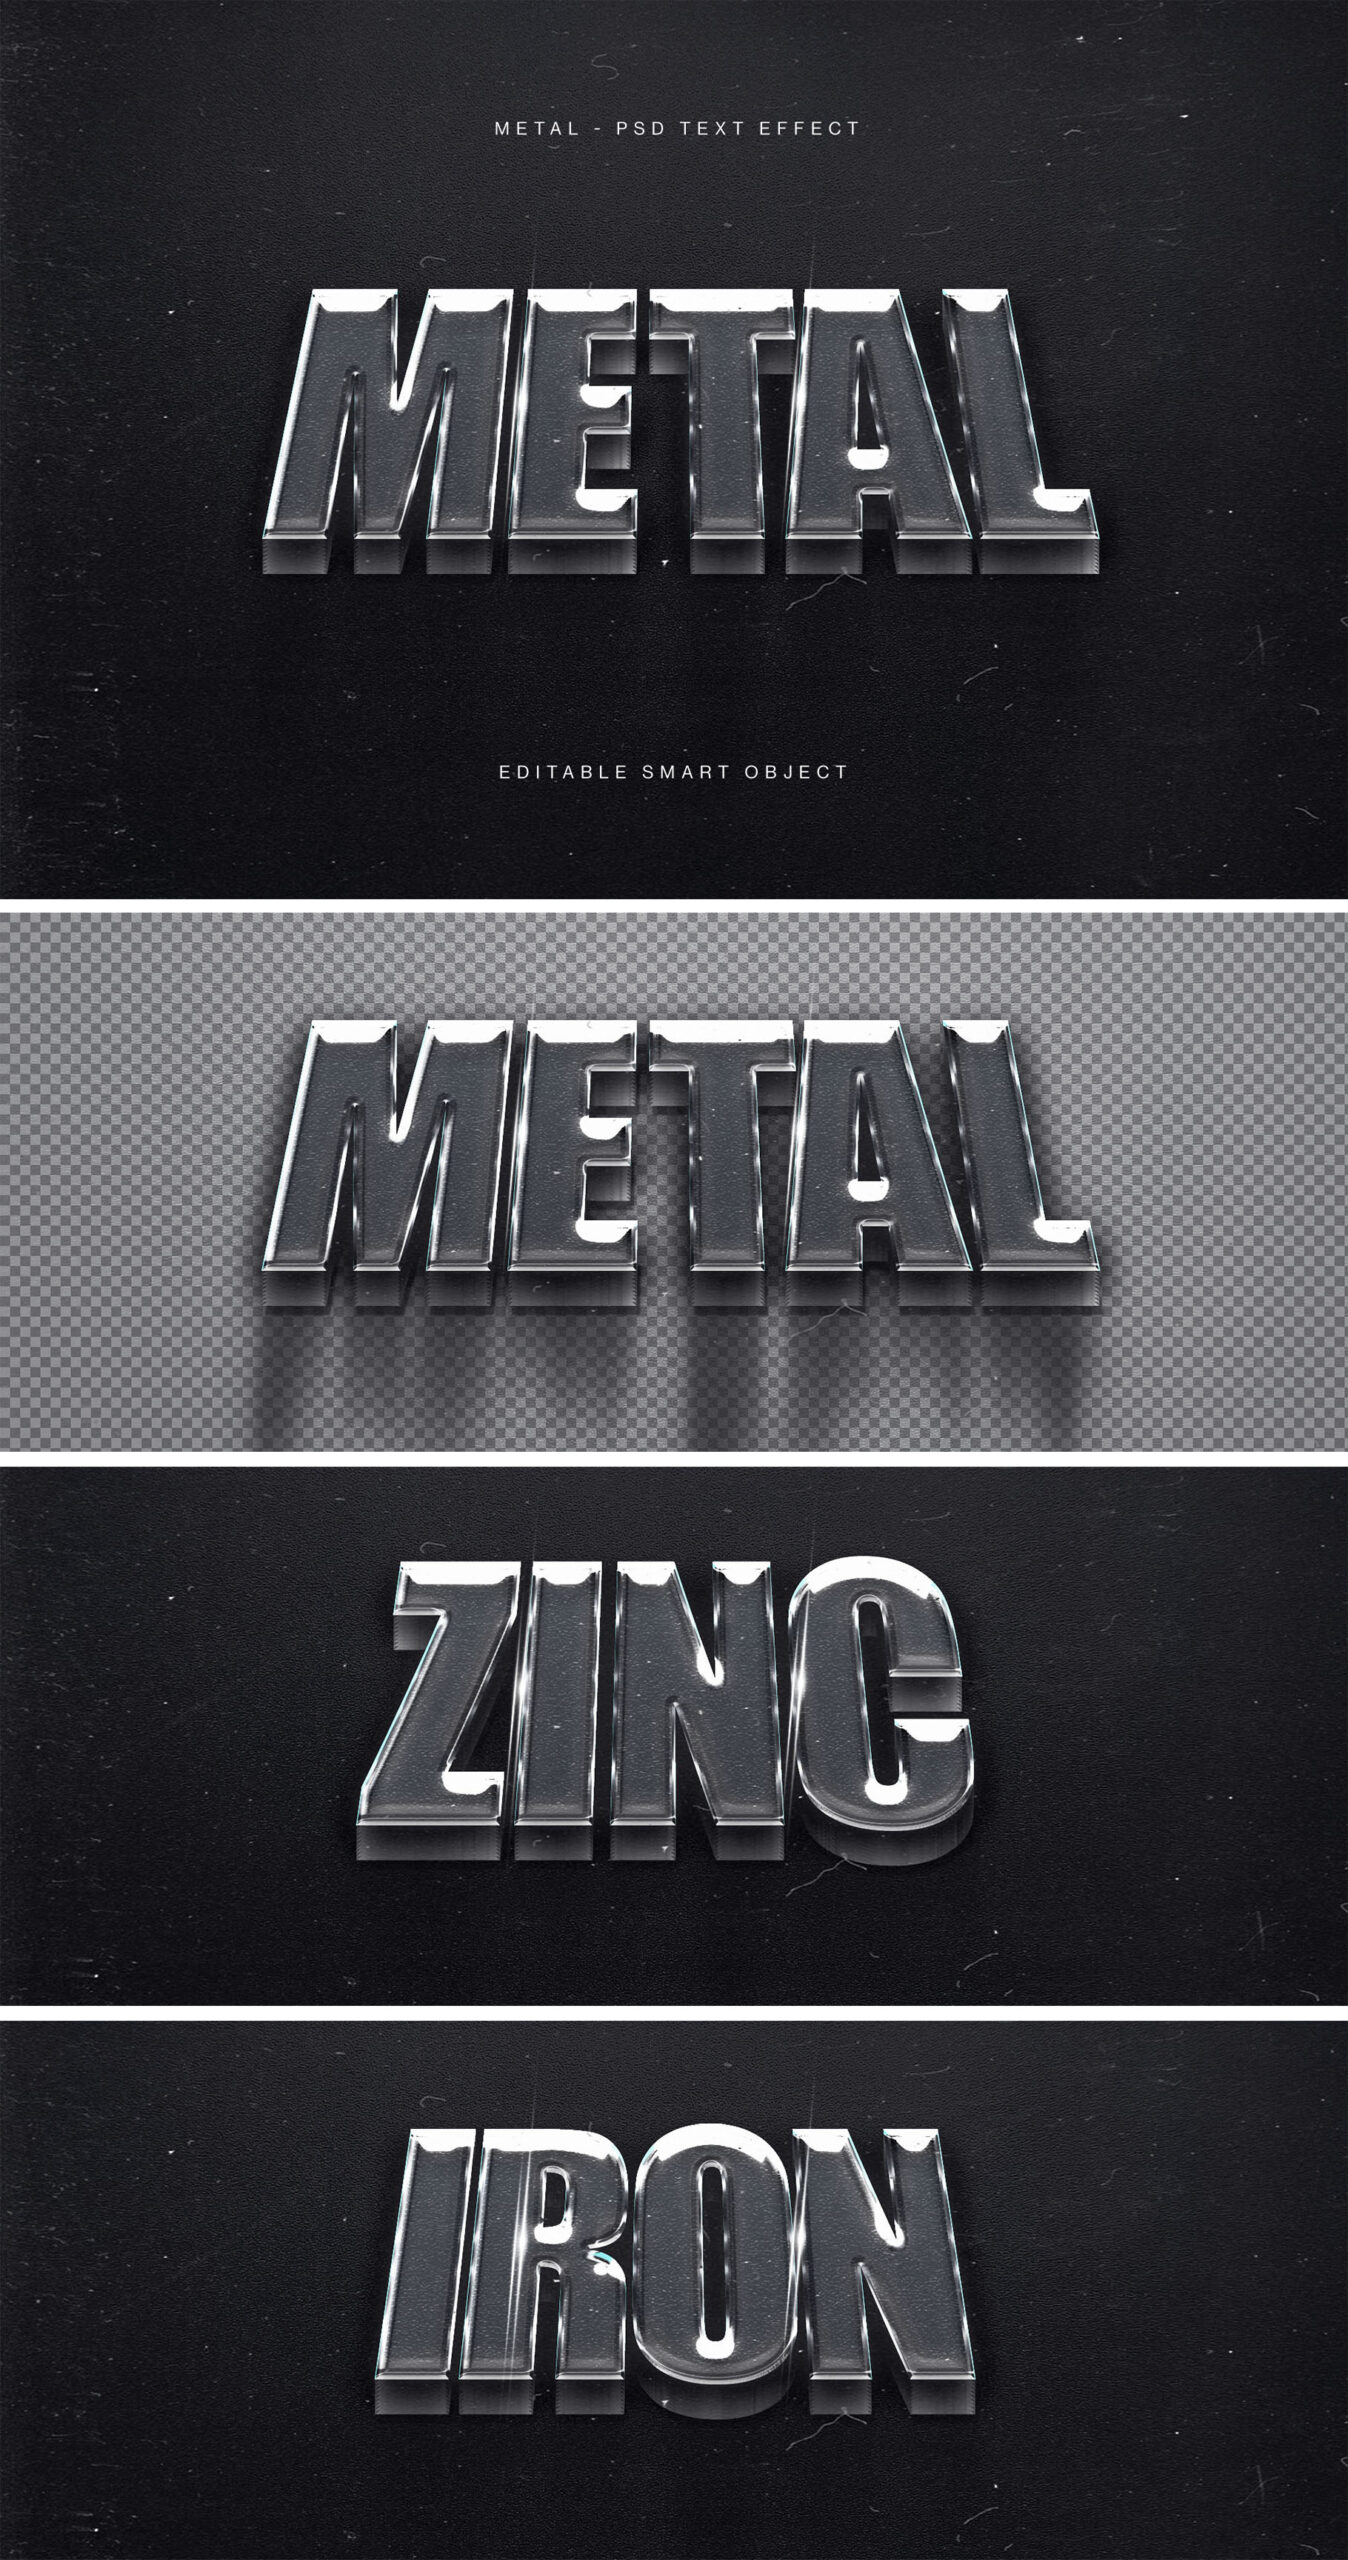 Metal Text Effect in PSD format